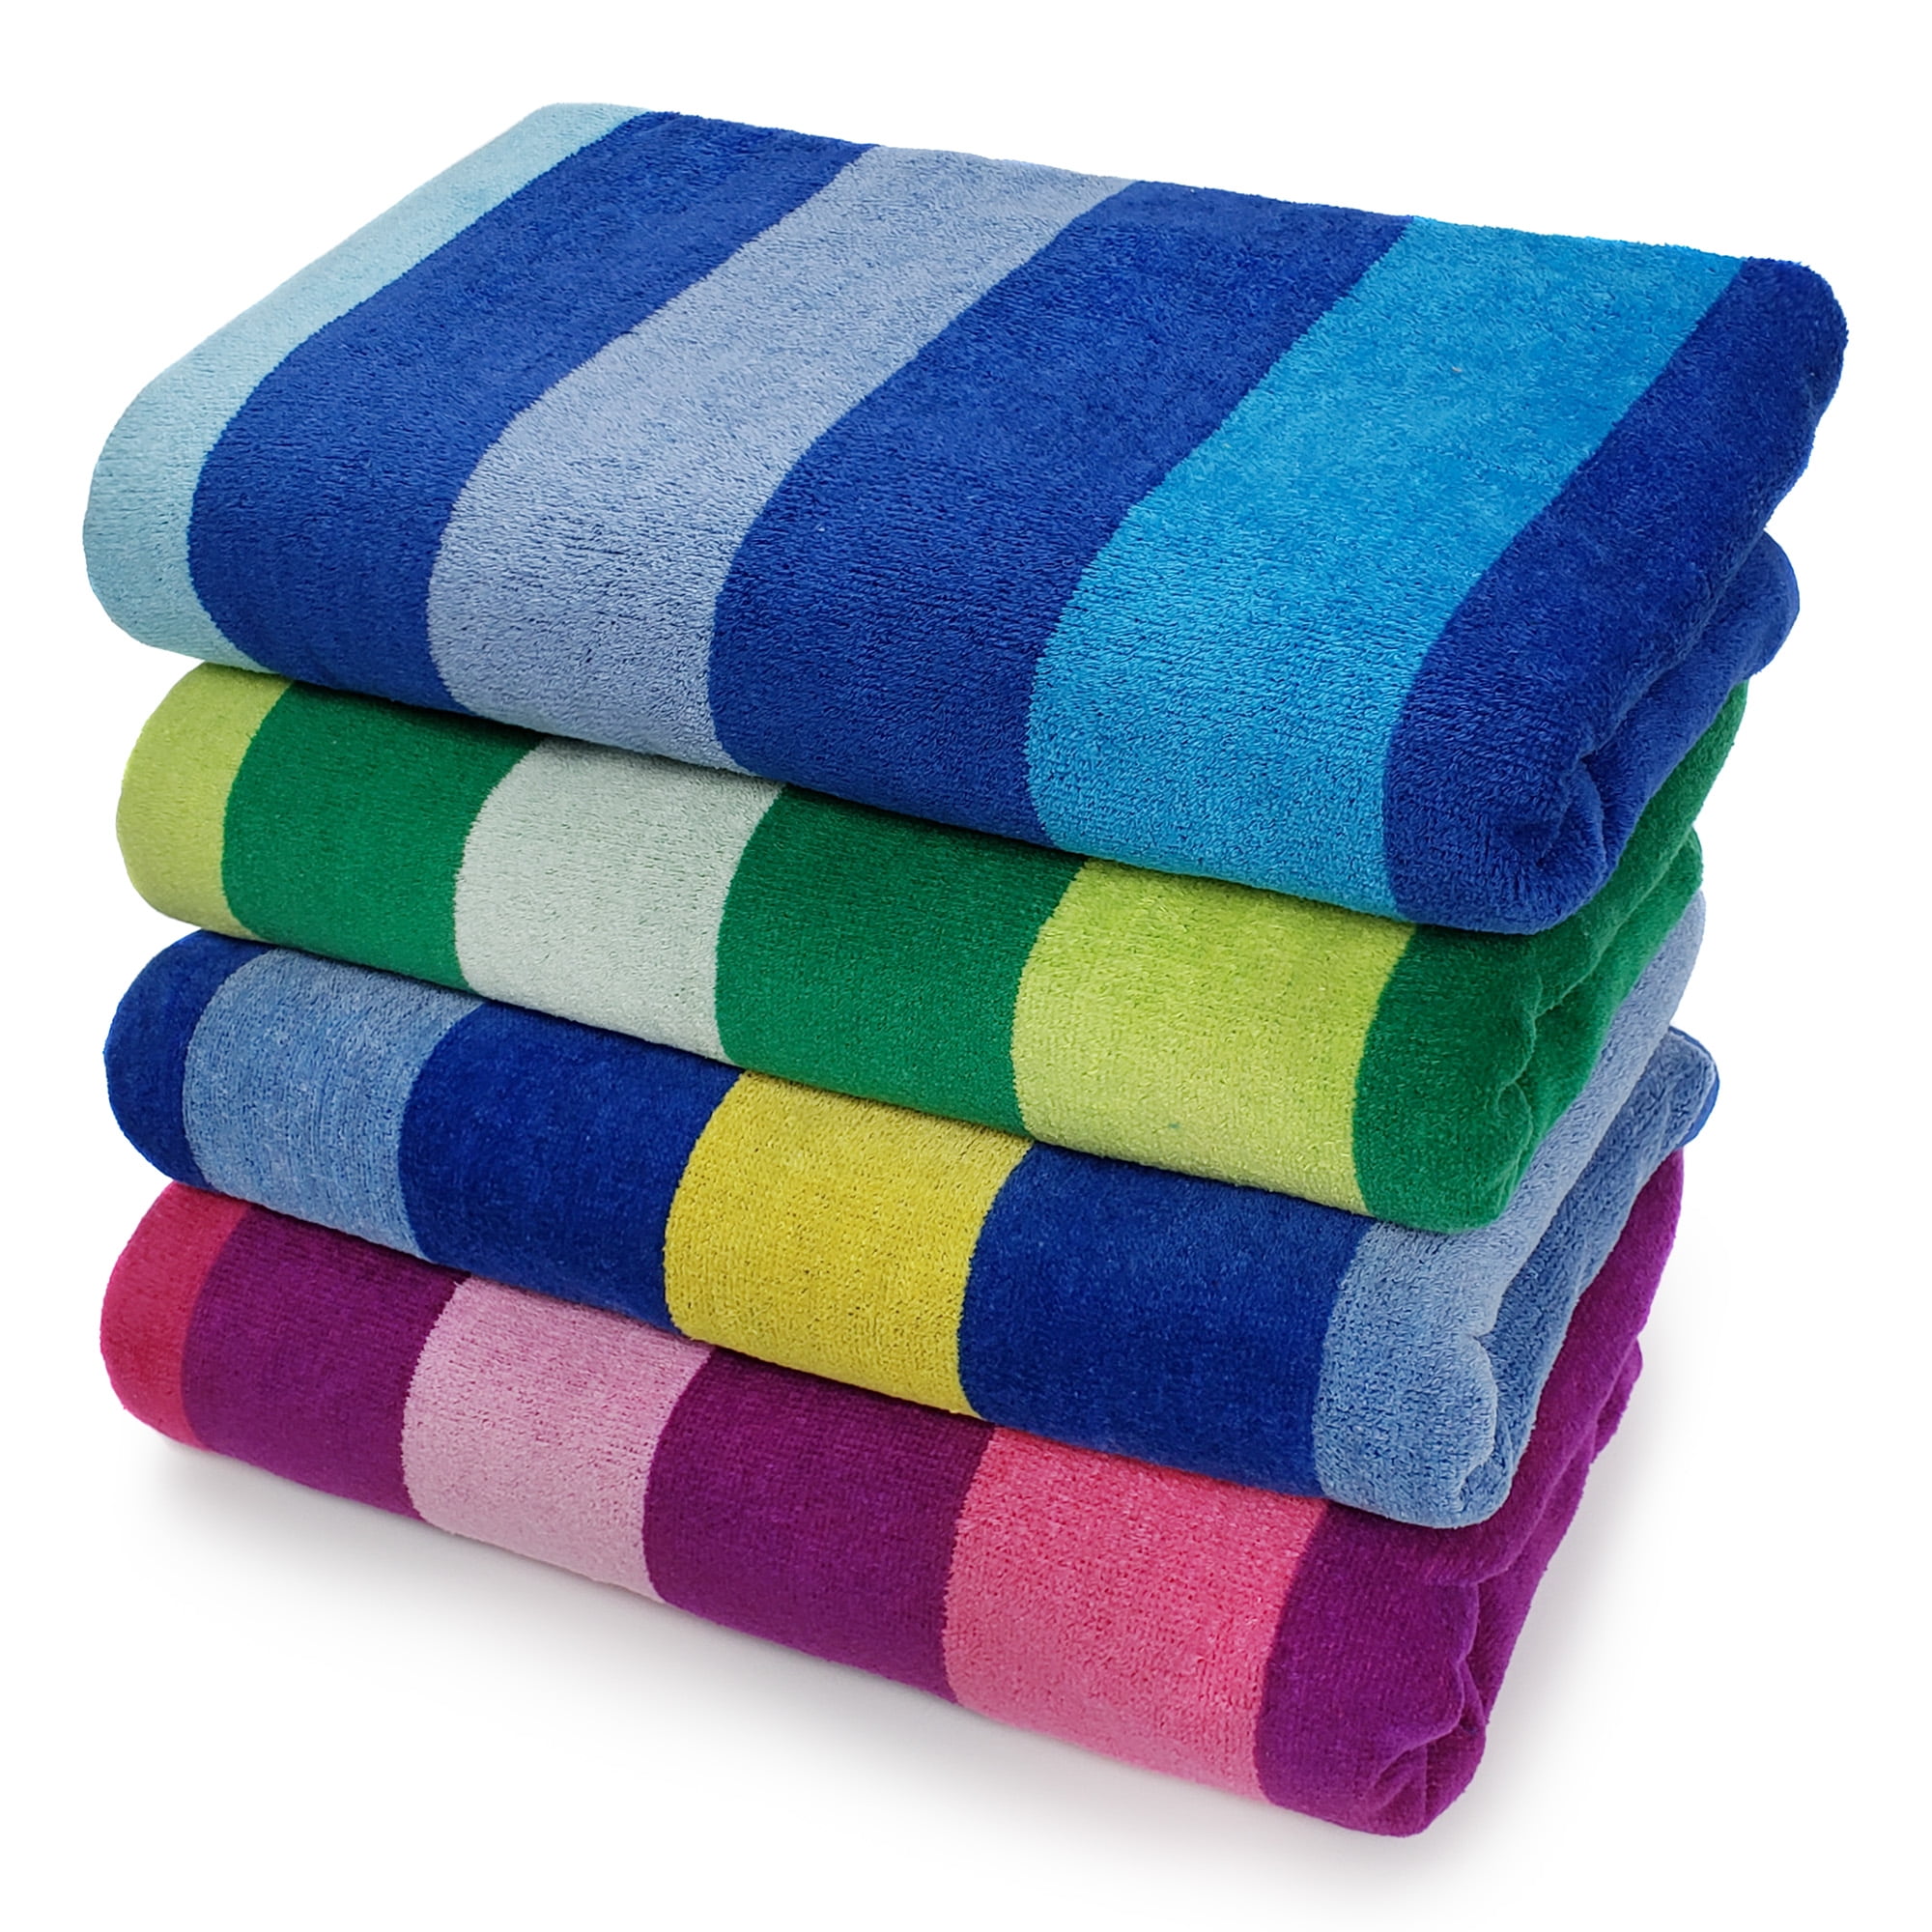 4 X STRIPED BRIGHT 100% COMBED COTTON SOFT ABSORBANT BLUE HAND TOWELS 